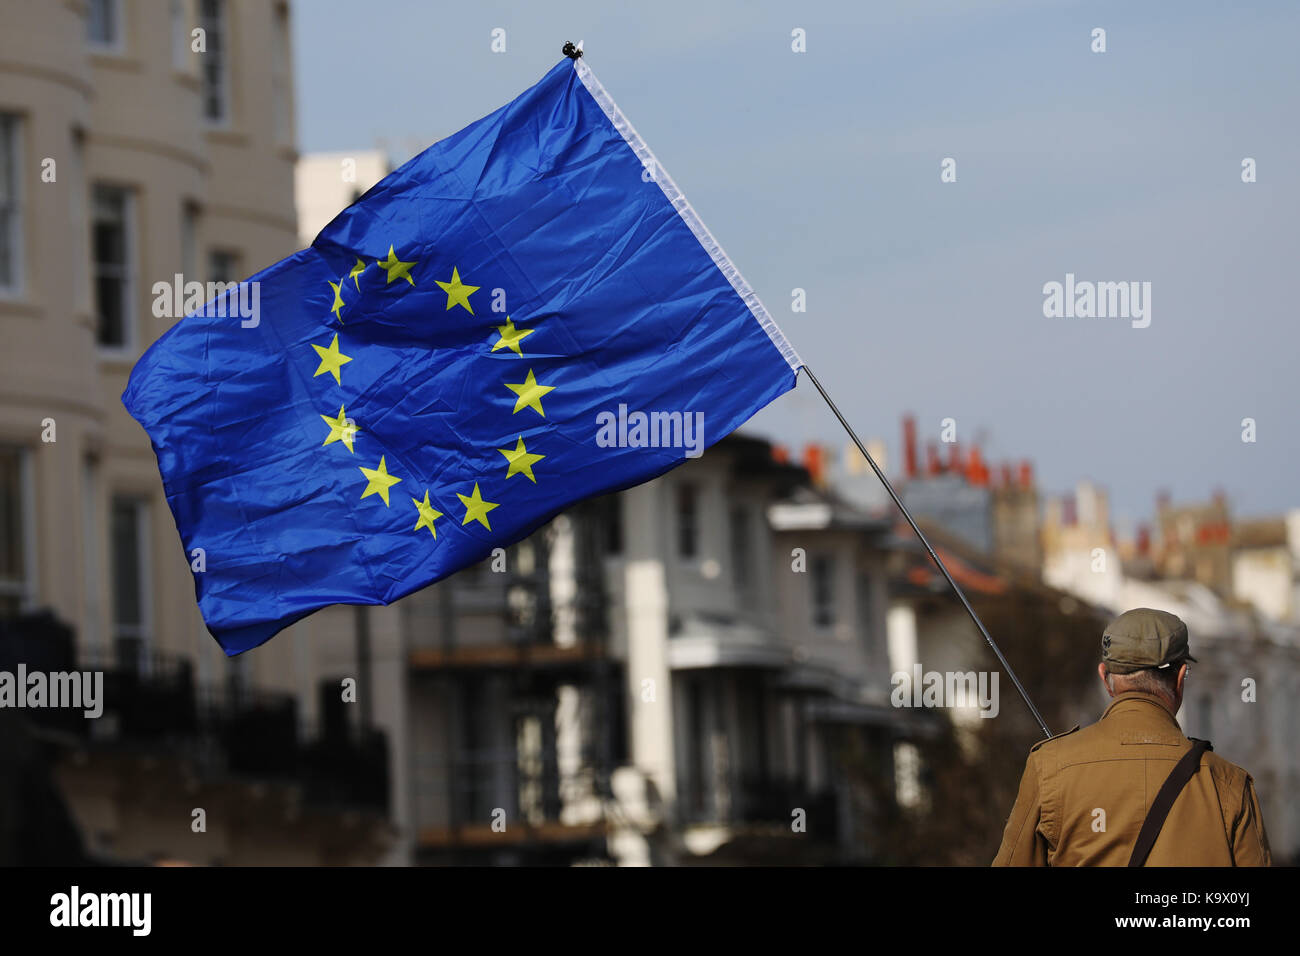 Brighton, UK. 24th September, 2017. A Pro European Union supporter waves an EU flag during a protest against Brexit in Brighton, UK, Sunday, September 24, 2017. Protesters rallied outside the annual Labour Party Conference being held in Brighton and attended by the opposition leader Jeremy Corbyn. Photograph : Credit: Luke MacGregor/Alamy Live News Stock Photo